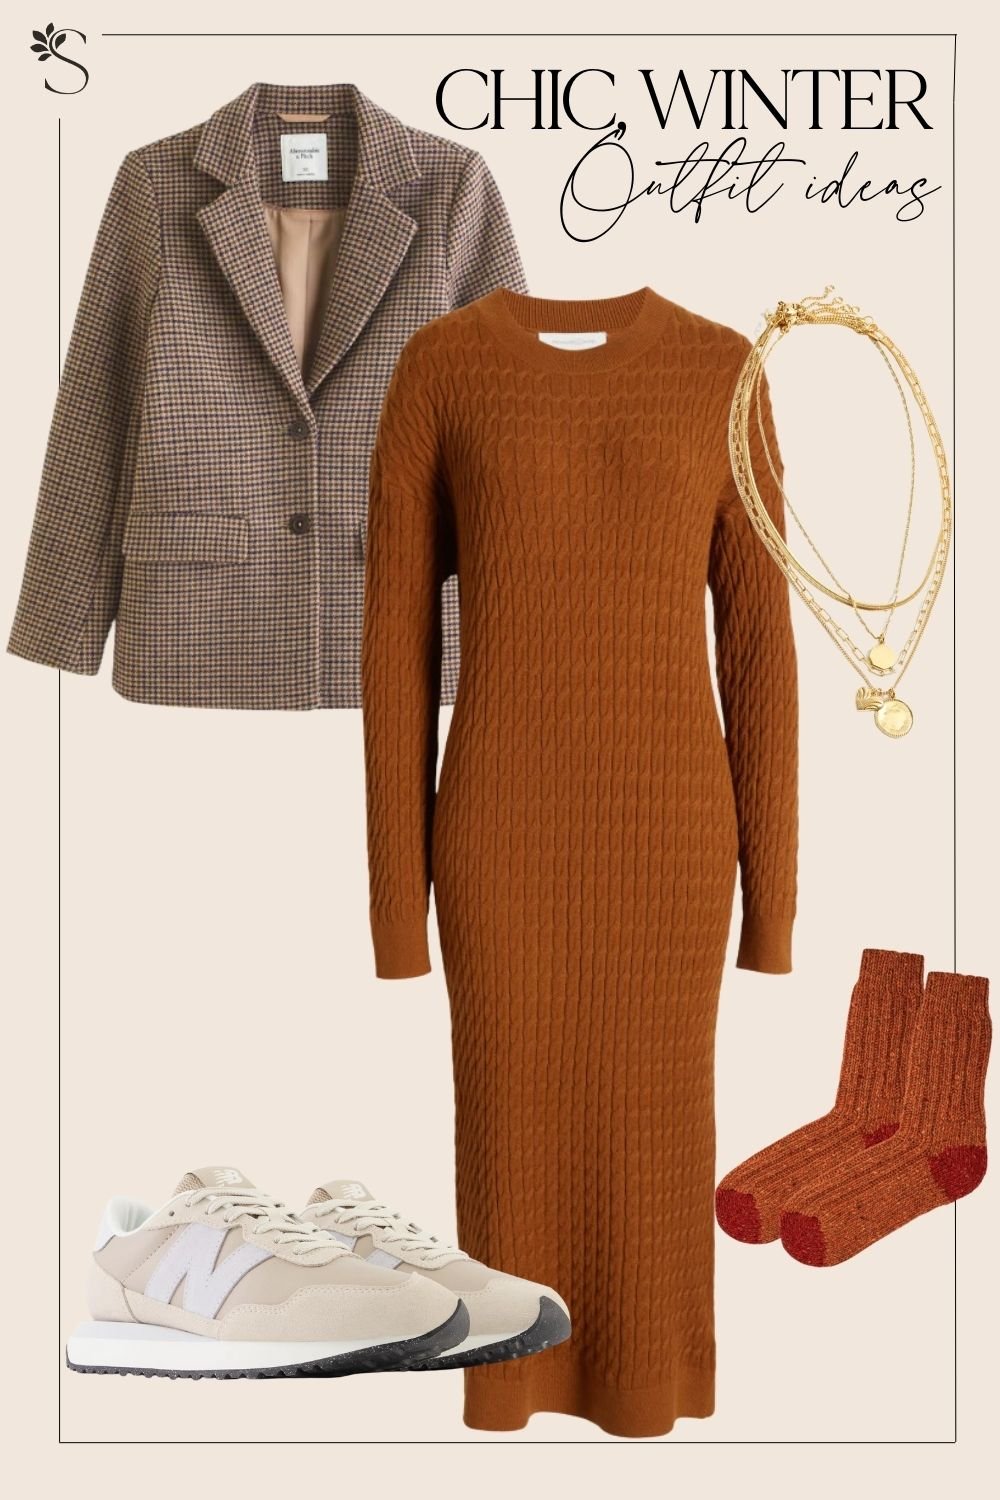 HOW TO STYLE A KNIT DRESS WITH A BLAZER - My name is Lovely!